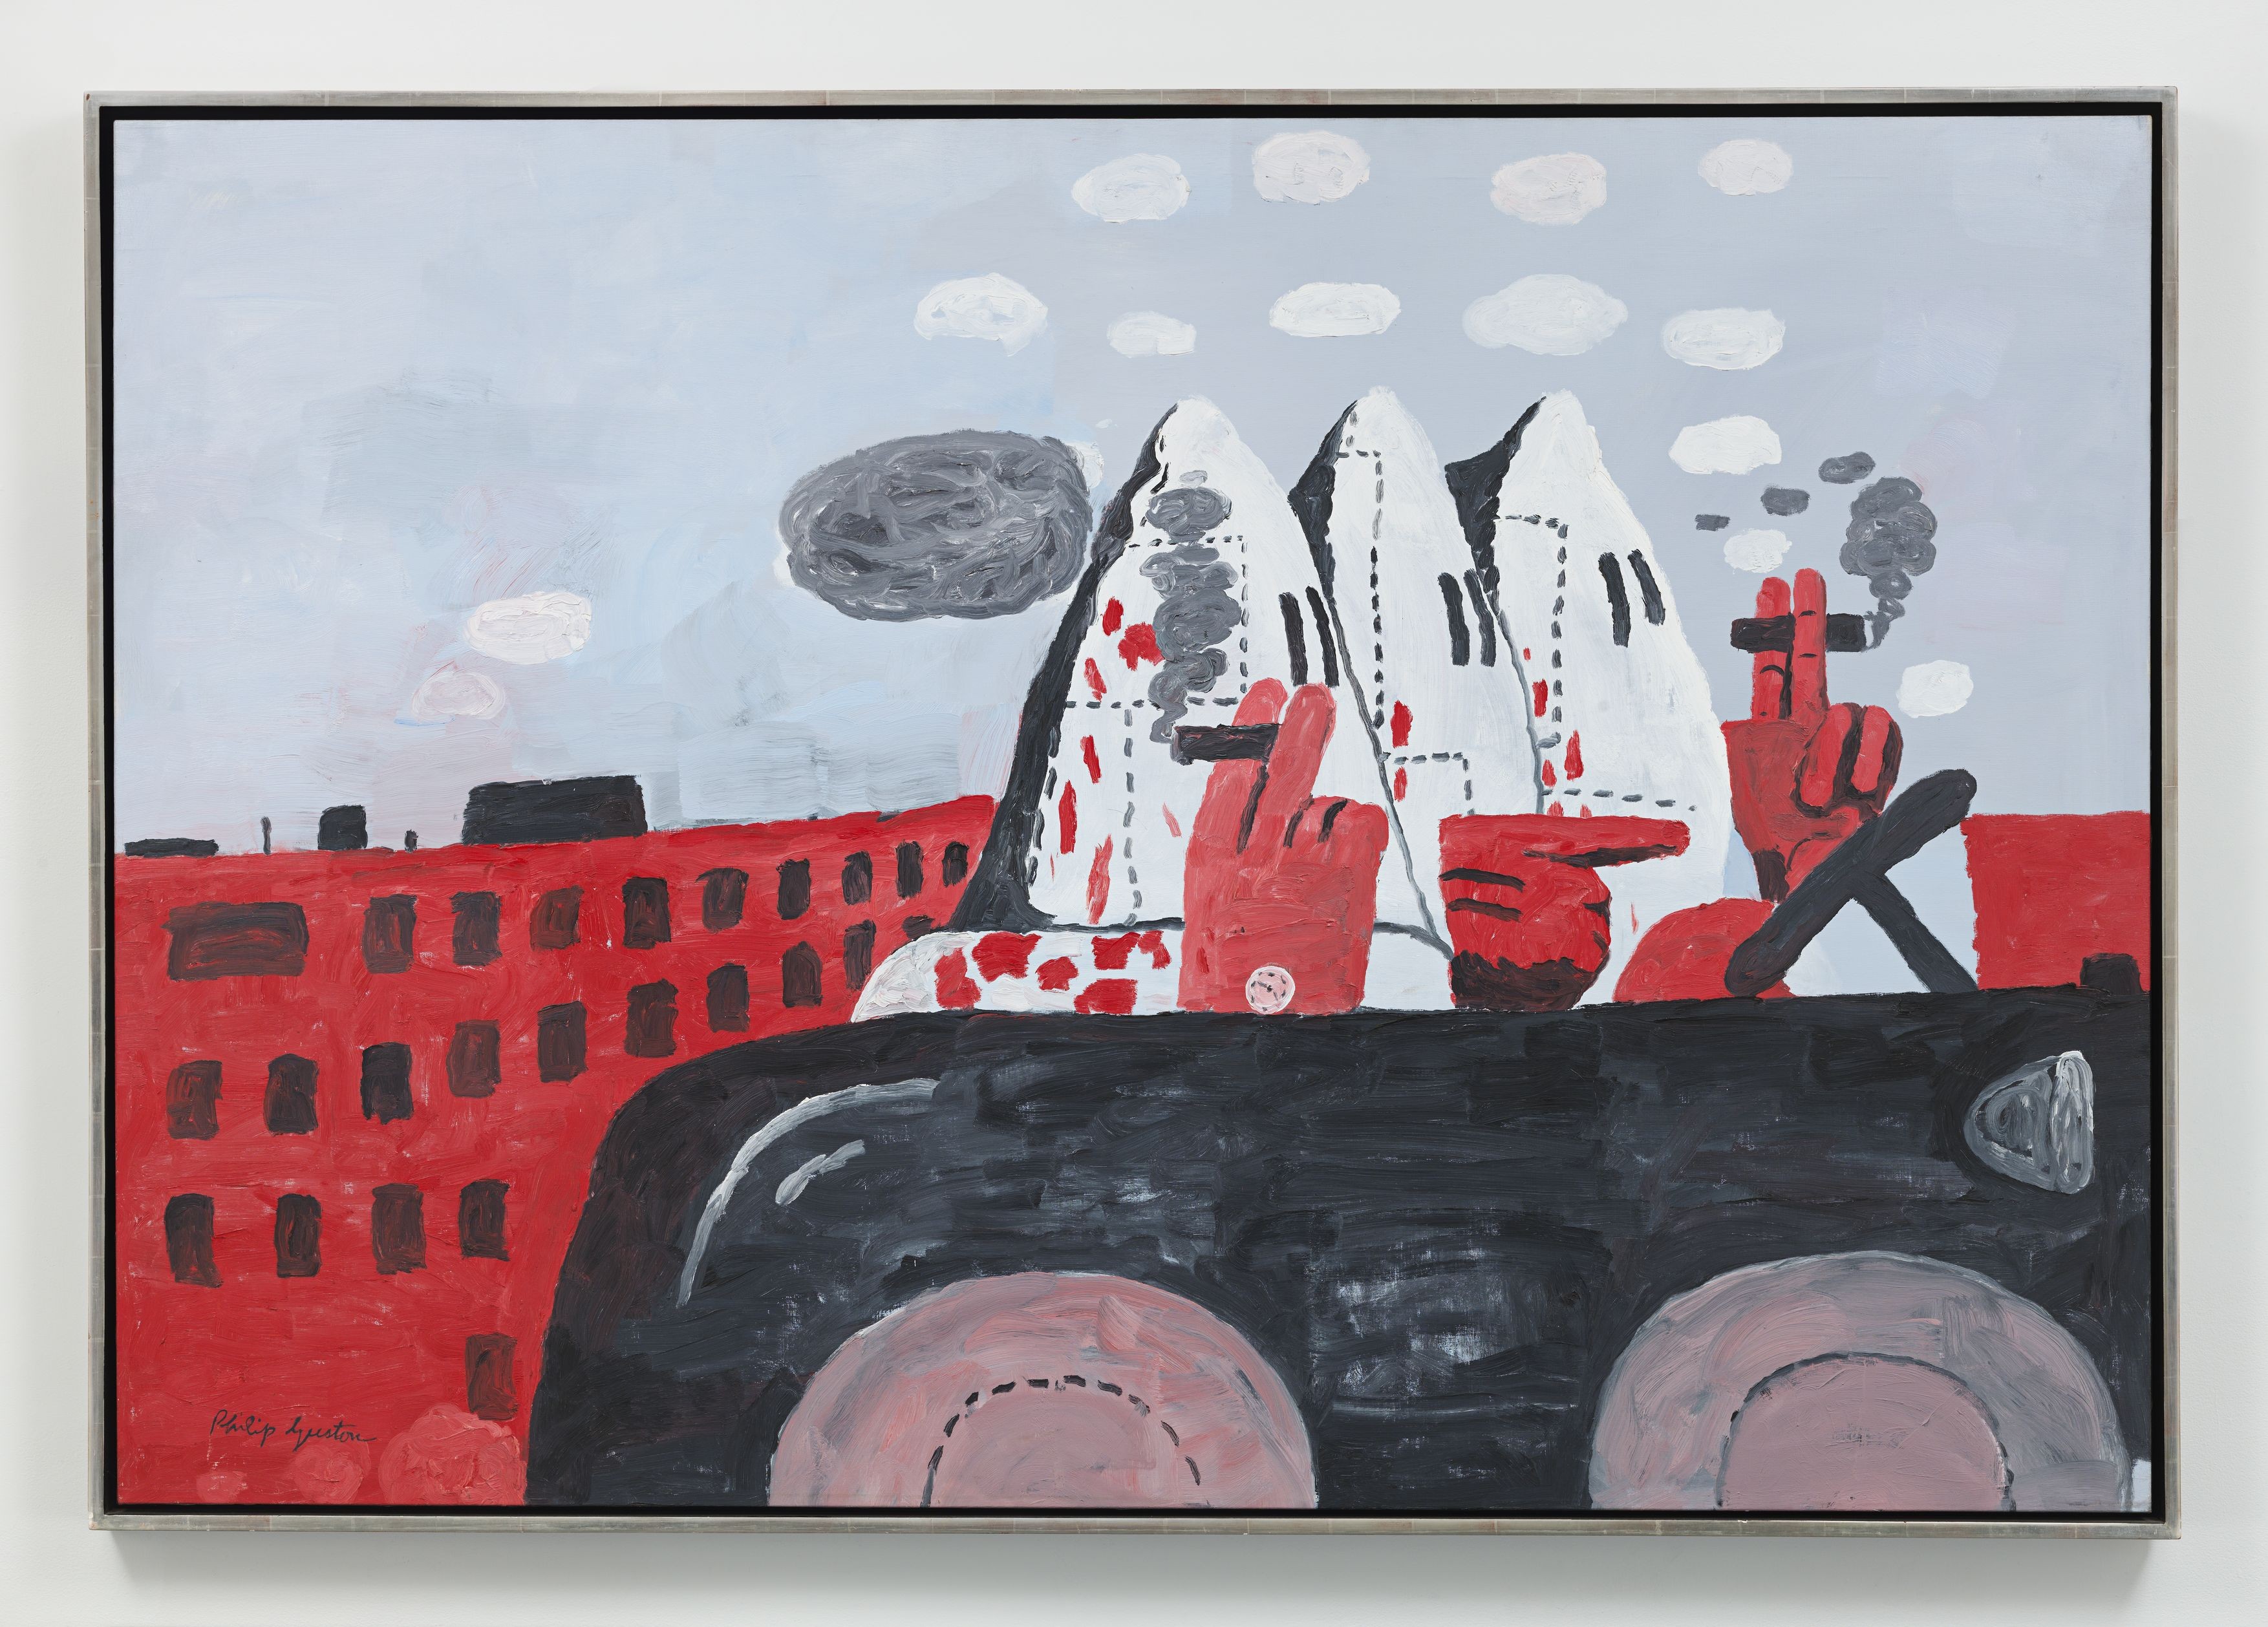 Riding Around (1969) is one of many artworks by Philip Guston currently on show in Hong Kong at the Hauser & Wirth art gallery in Central. Photo: Genevieve Hanson